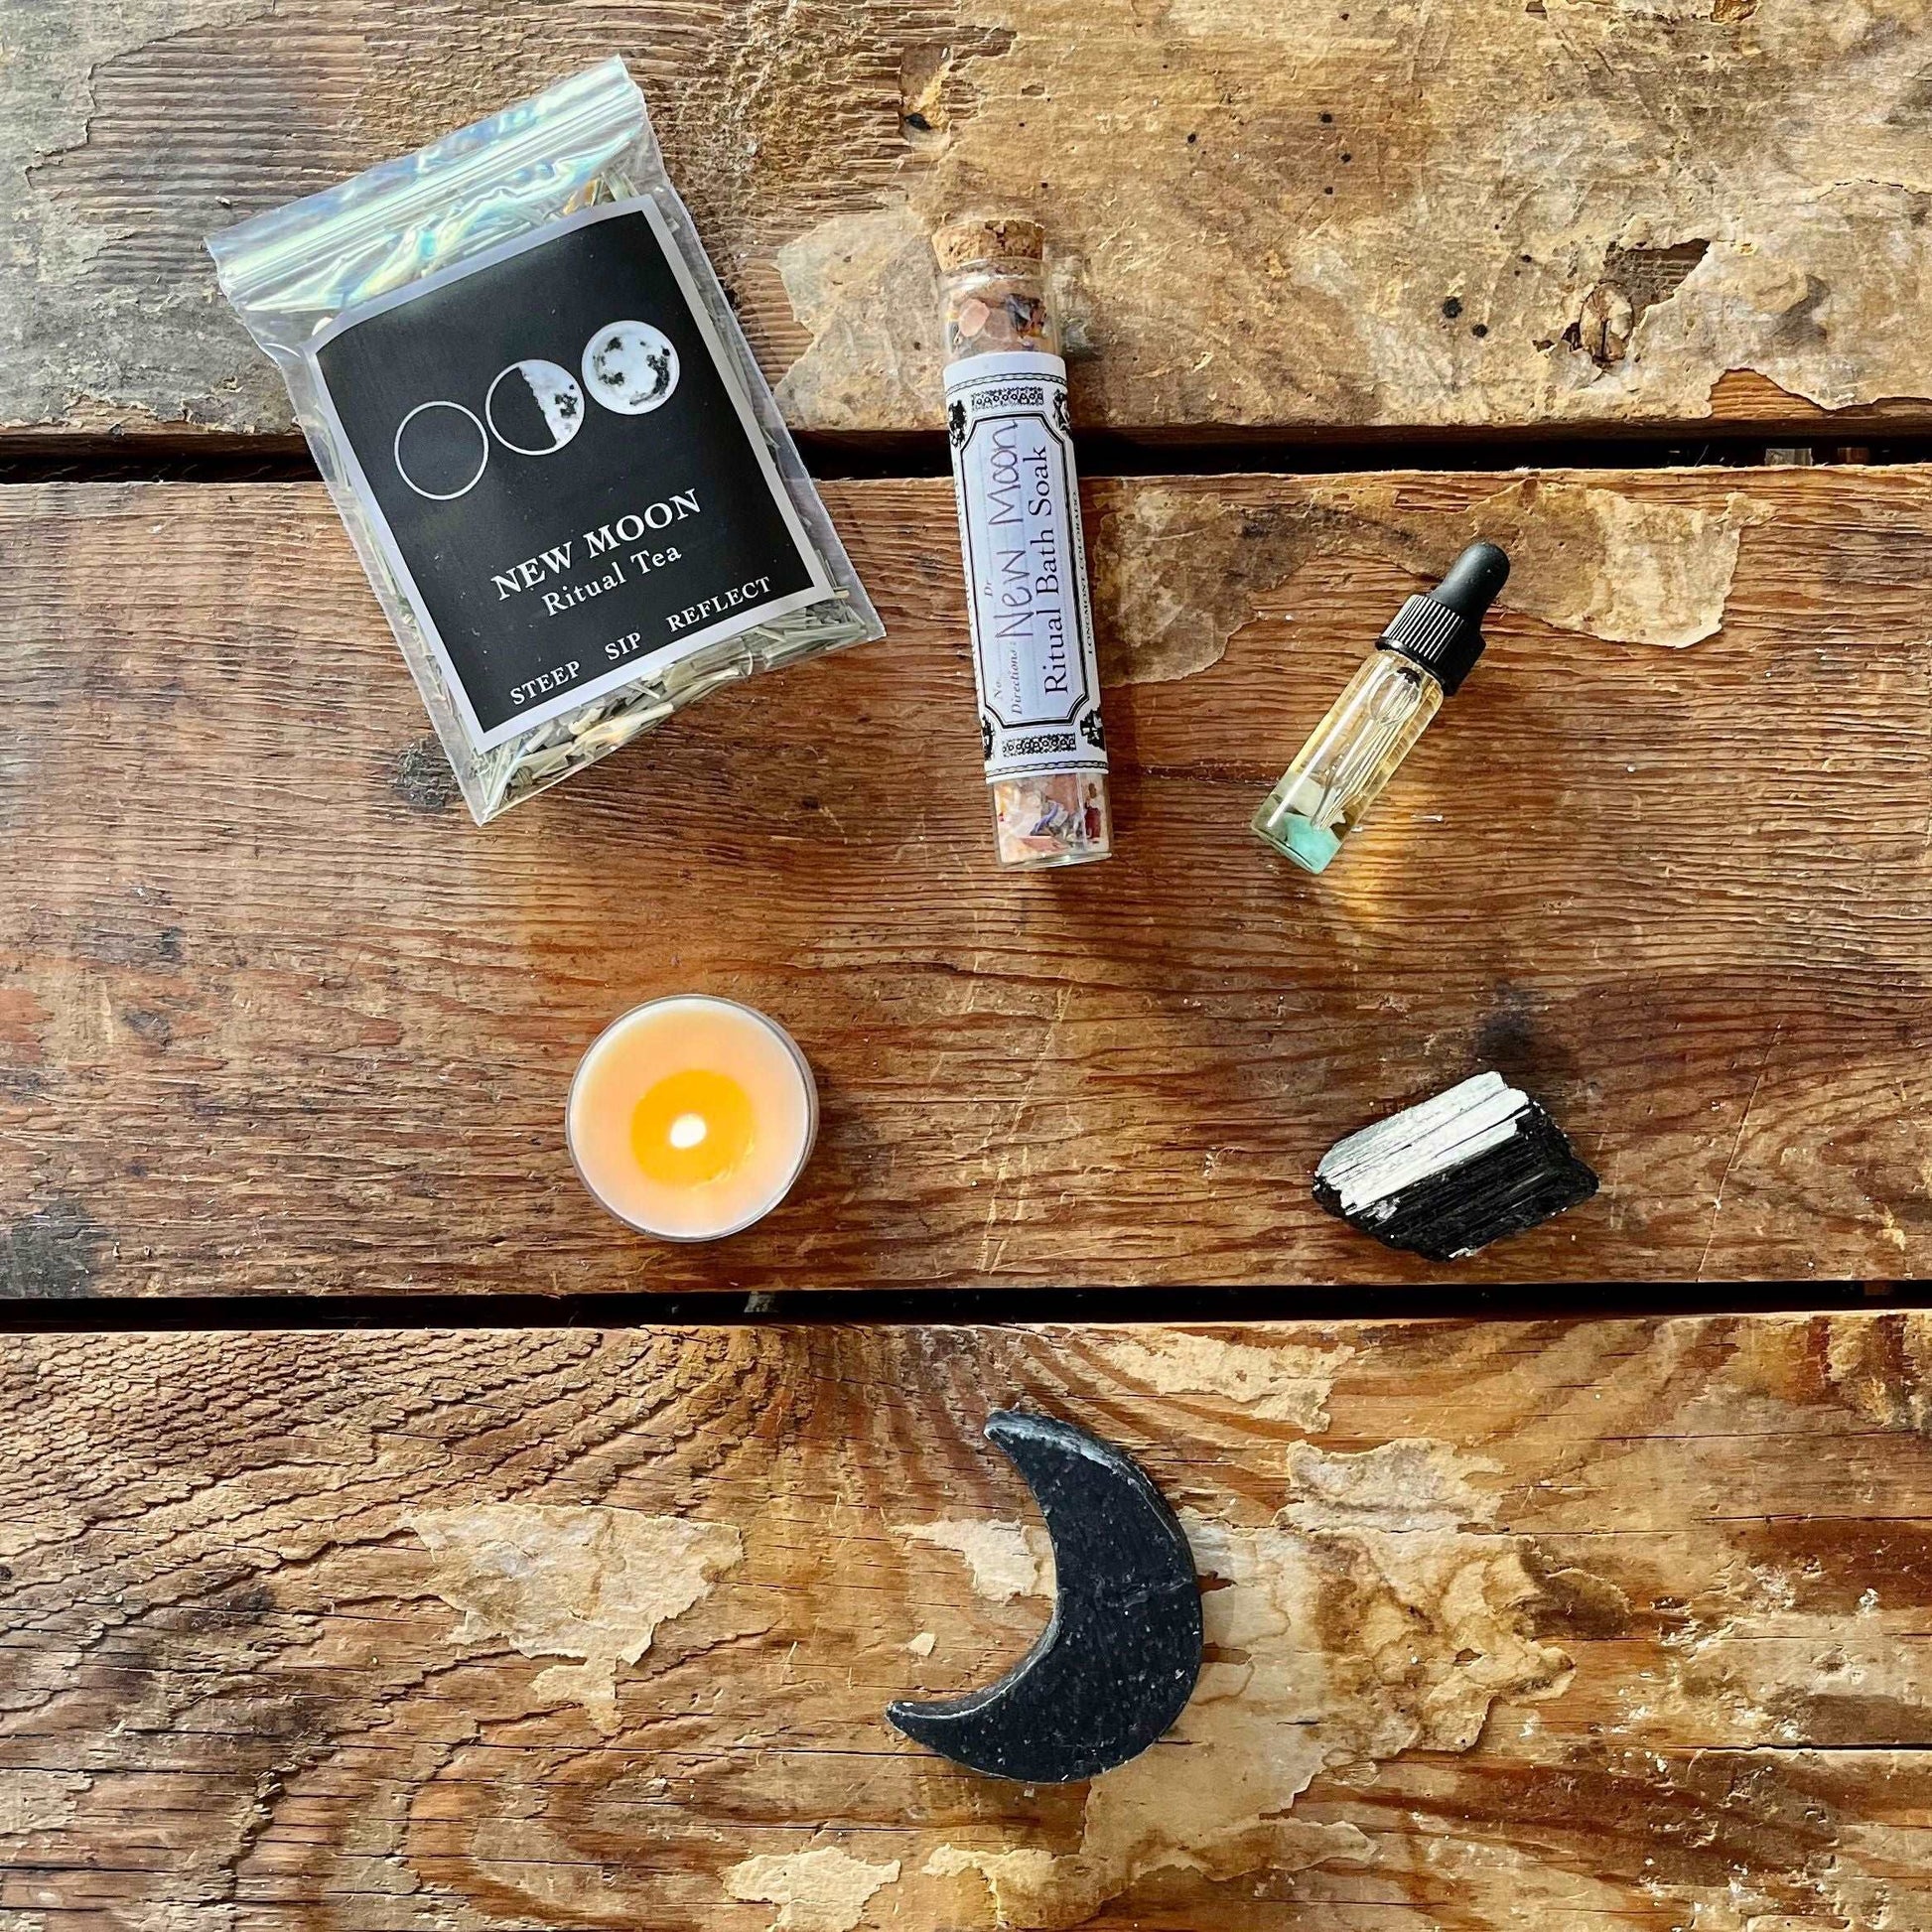 Embrace the potential of our New Moon Intention Ritual Kit. Ignite your intentions with a New Moon Intention Tea Light, indulge in self-care with New Moon Salt & Charcoal Goat's Milk Soap and Salt Soak, and set the mood with New Moon Essential Oil. Ground your energy with Rough Black Tourmaline, sip on New Moon Ritual Tea, and follow guidance from the New Moon Ritual Booklet. Welcome the lunar energy and manifest your intentions with this curated kit.